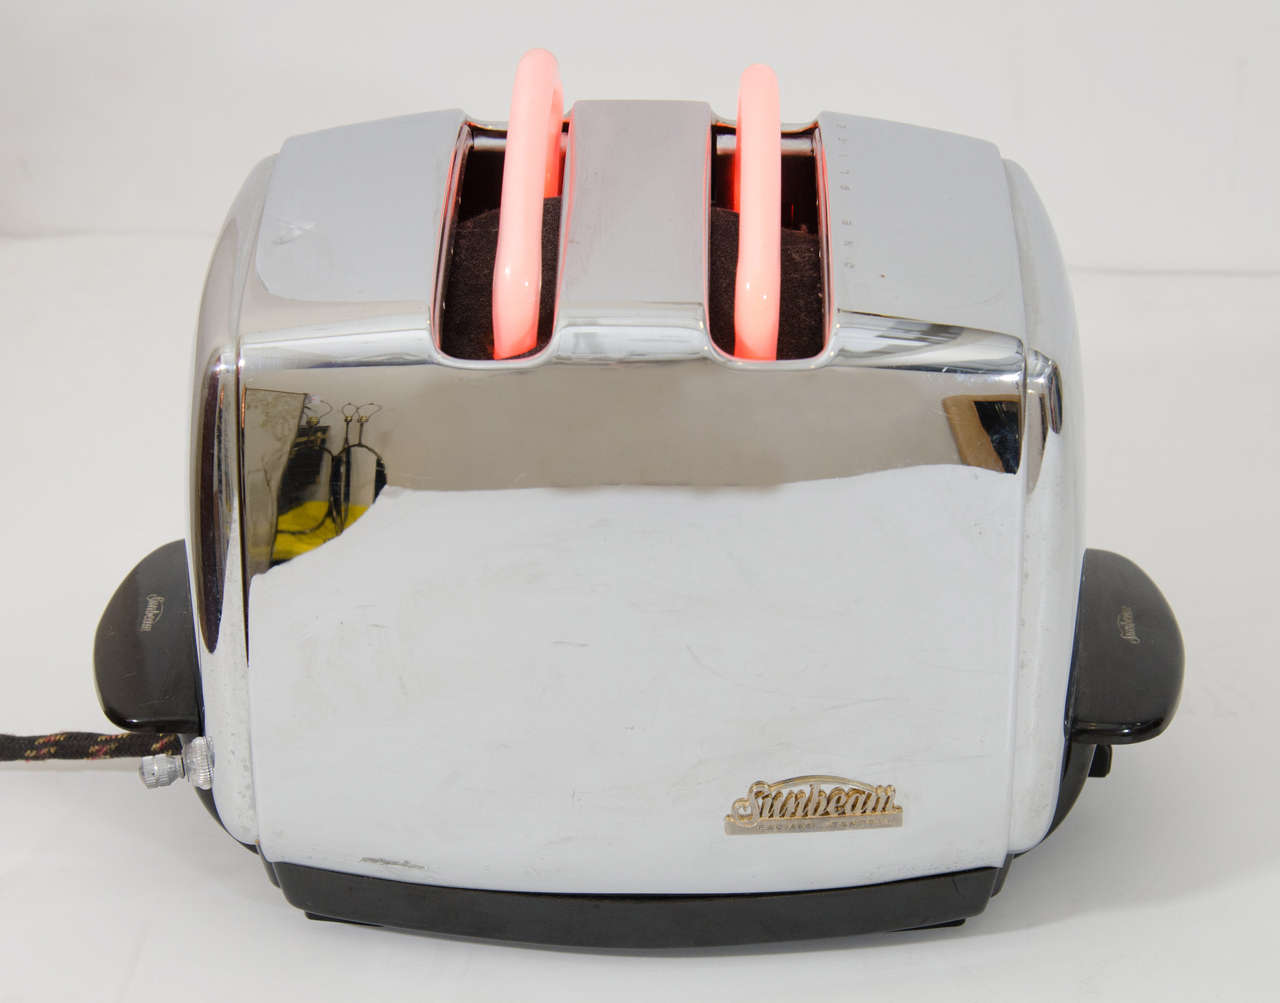 A vintage toaster by Sunbeam circa 1940s adapted into a neon light sculpture in the 1980s. The neon light forms toast. Original cloth wrapped cord. 

Good vintage condition with age appropriate wear.